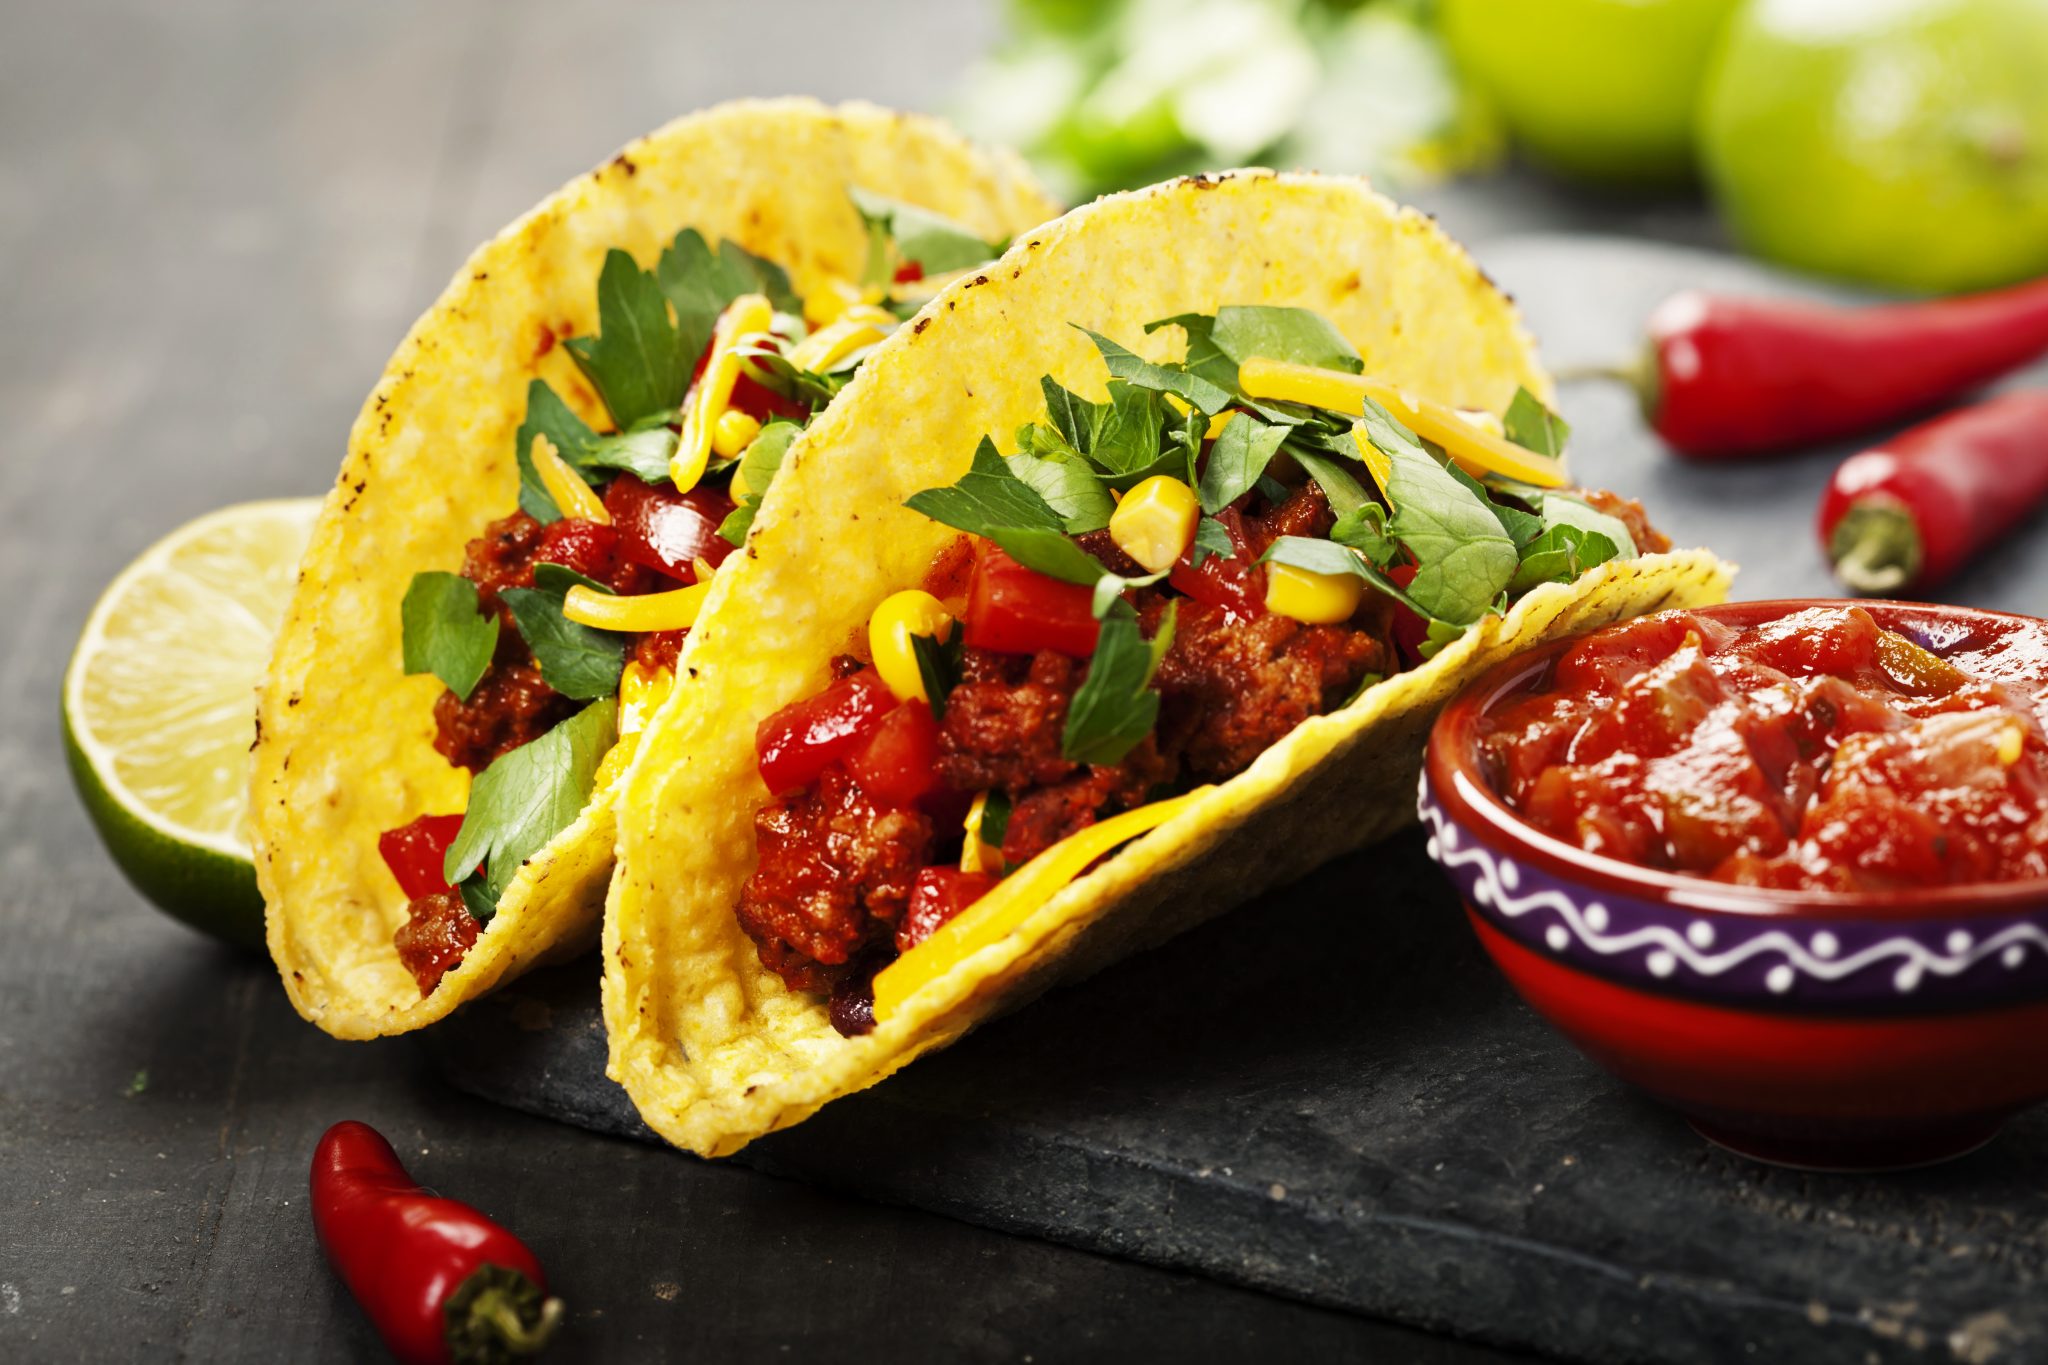 What is salsa? - The Association for Dressings & Sauces